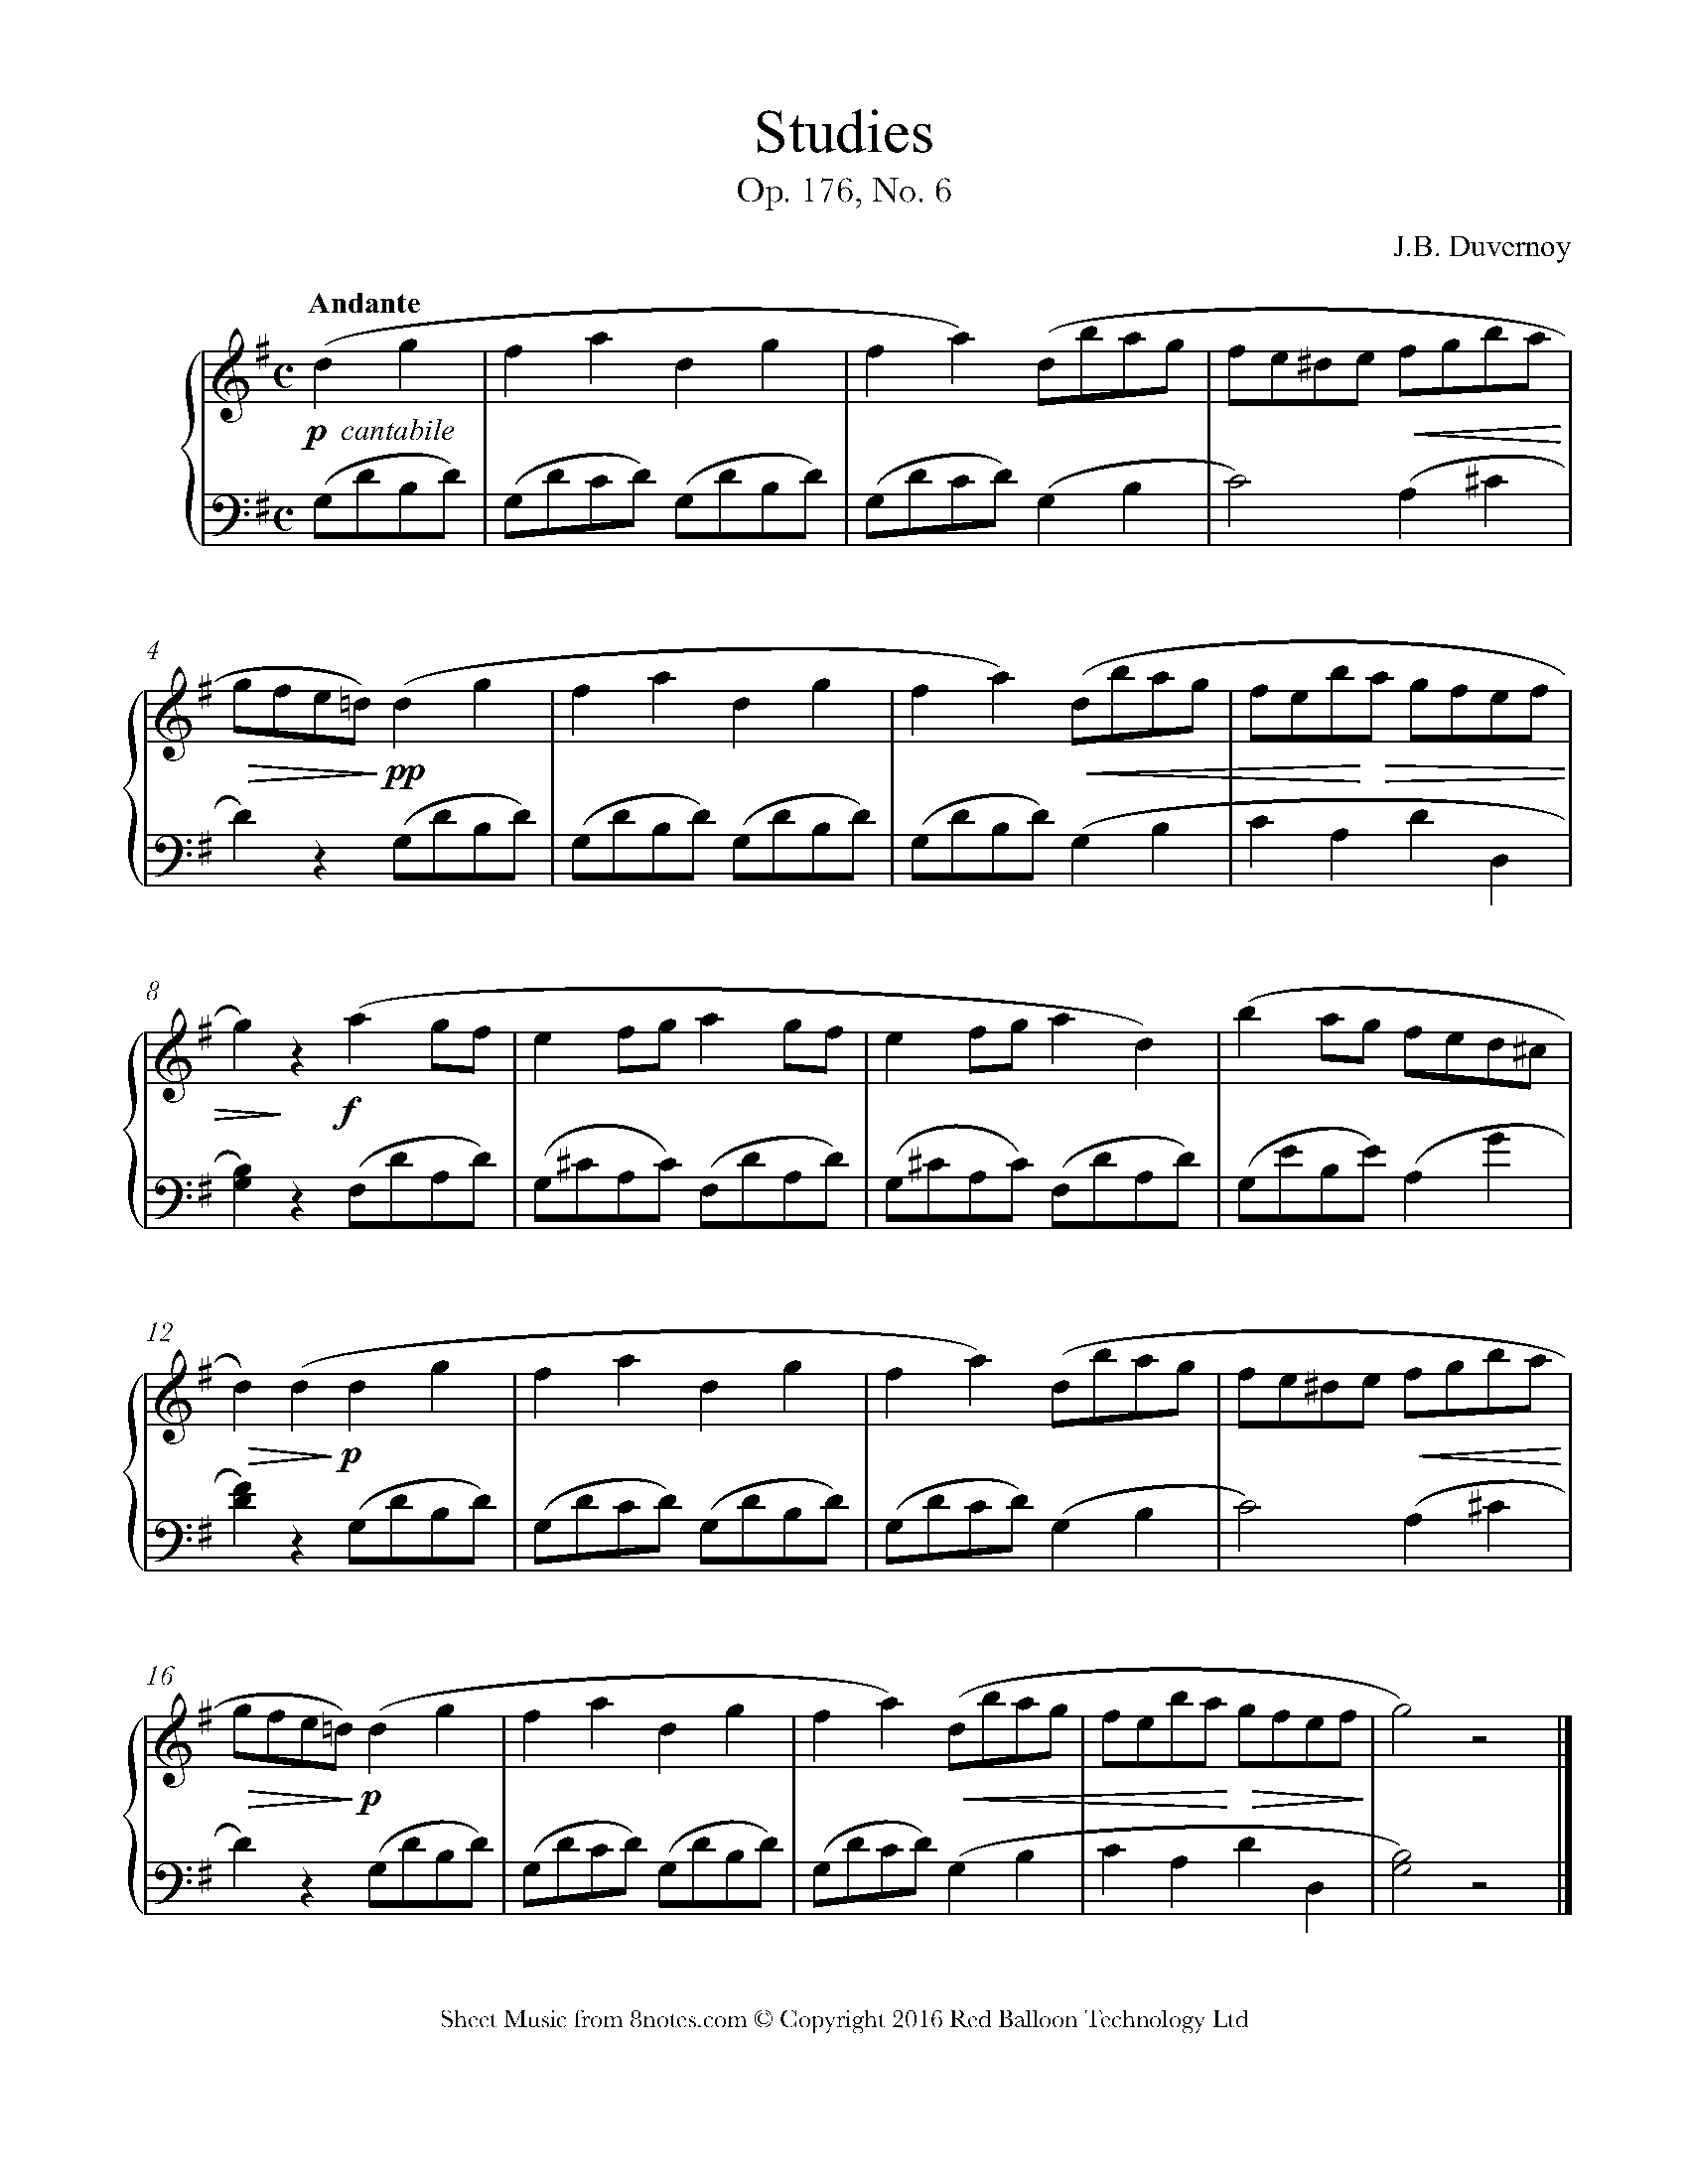 Free Piano Sheet Music, Lessons &amp;amp; Resources - 8Notes - Free Printable Piano Sheet Music For Popular Songs